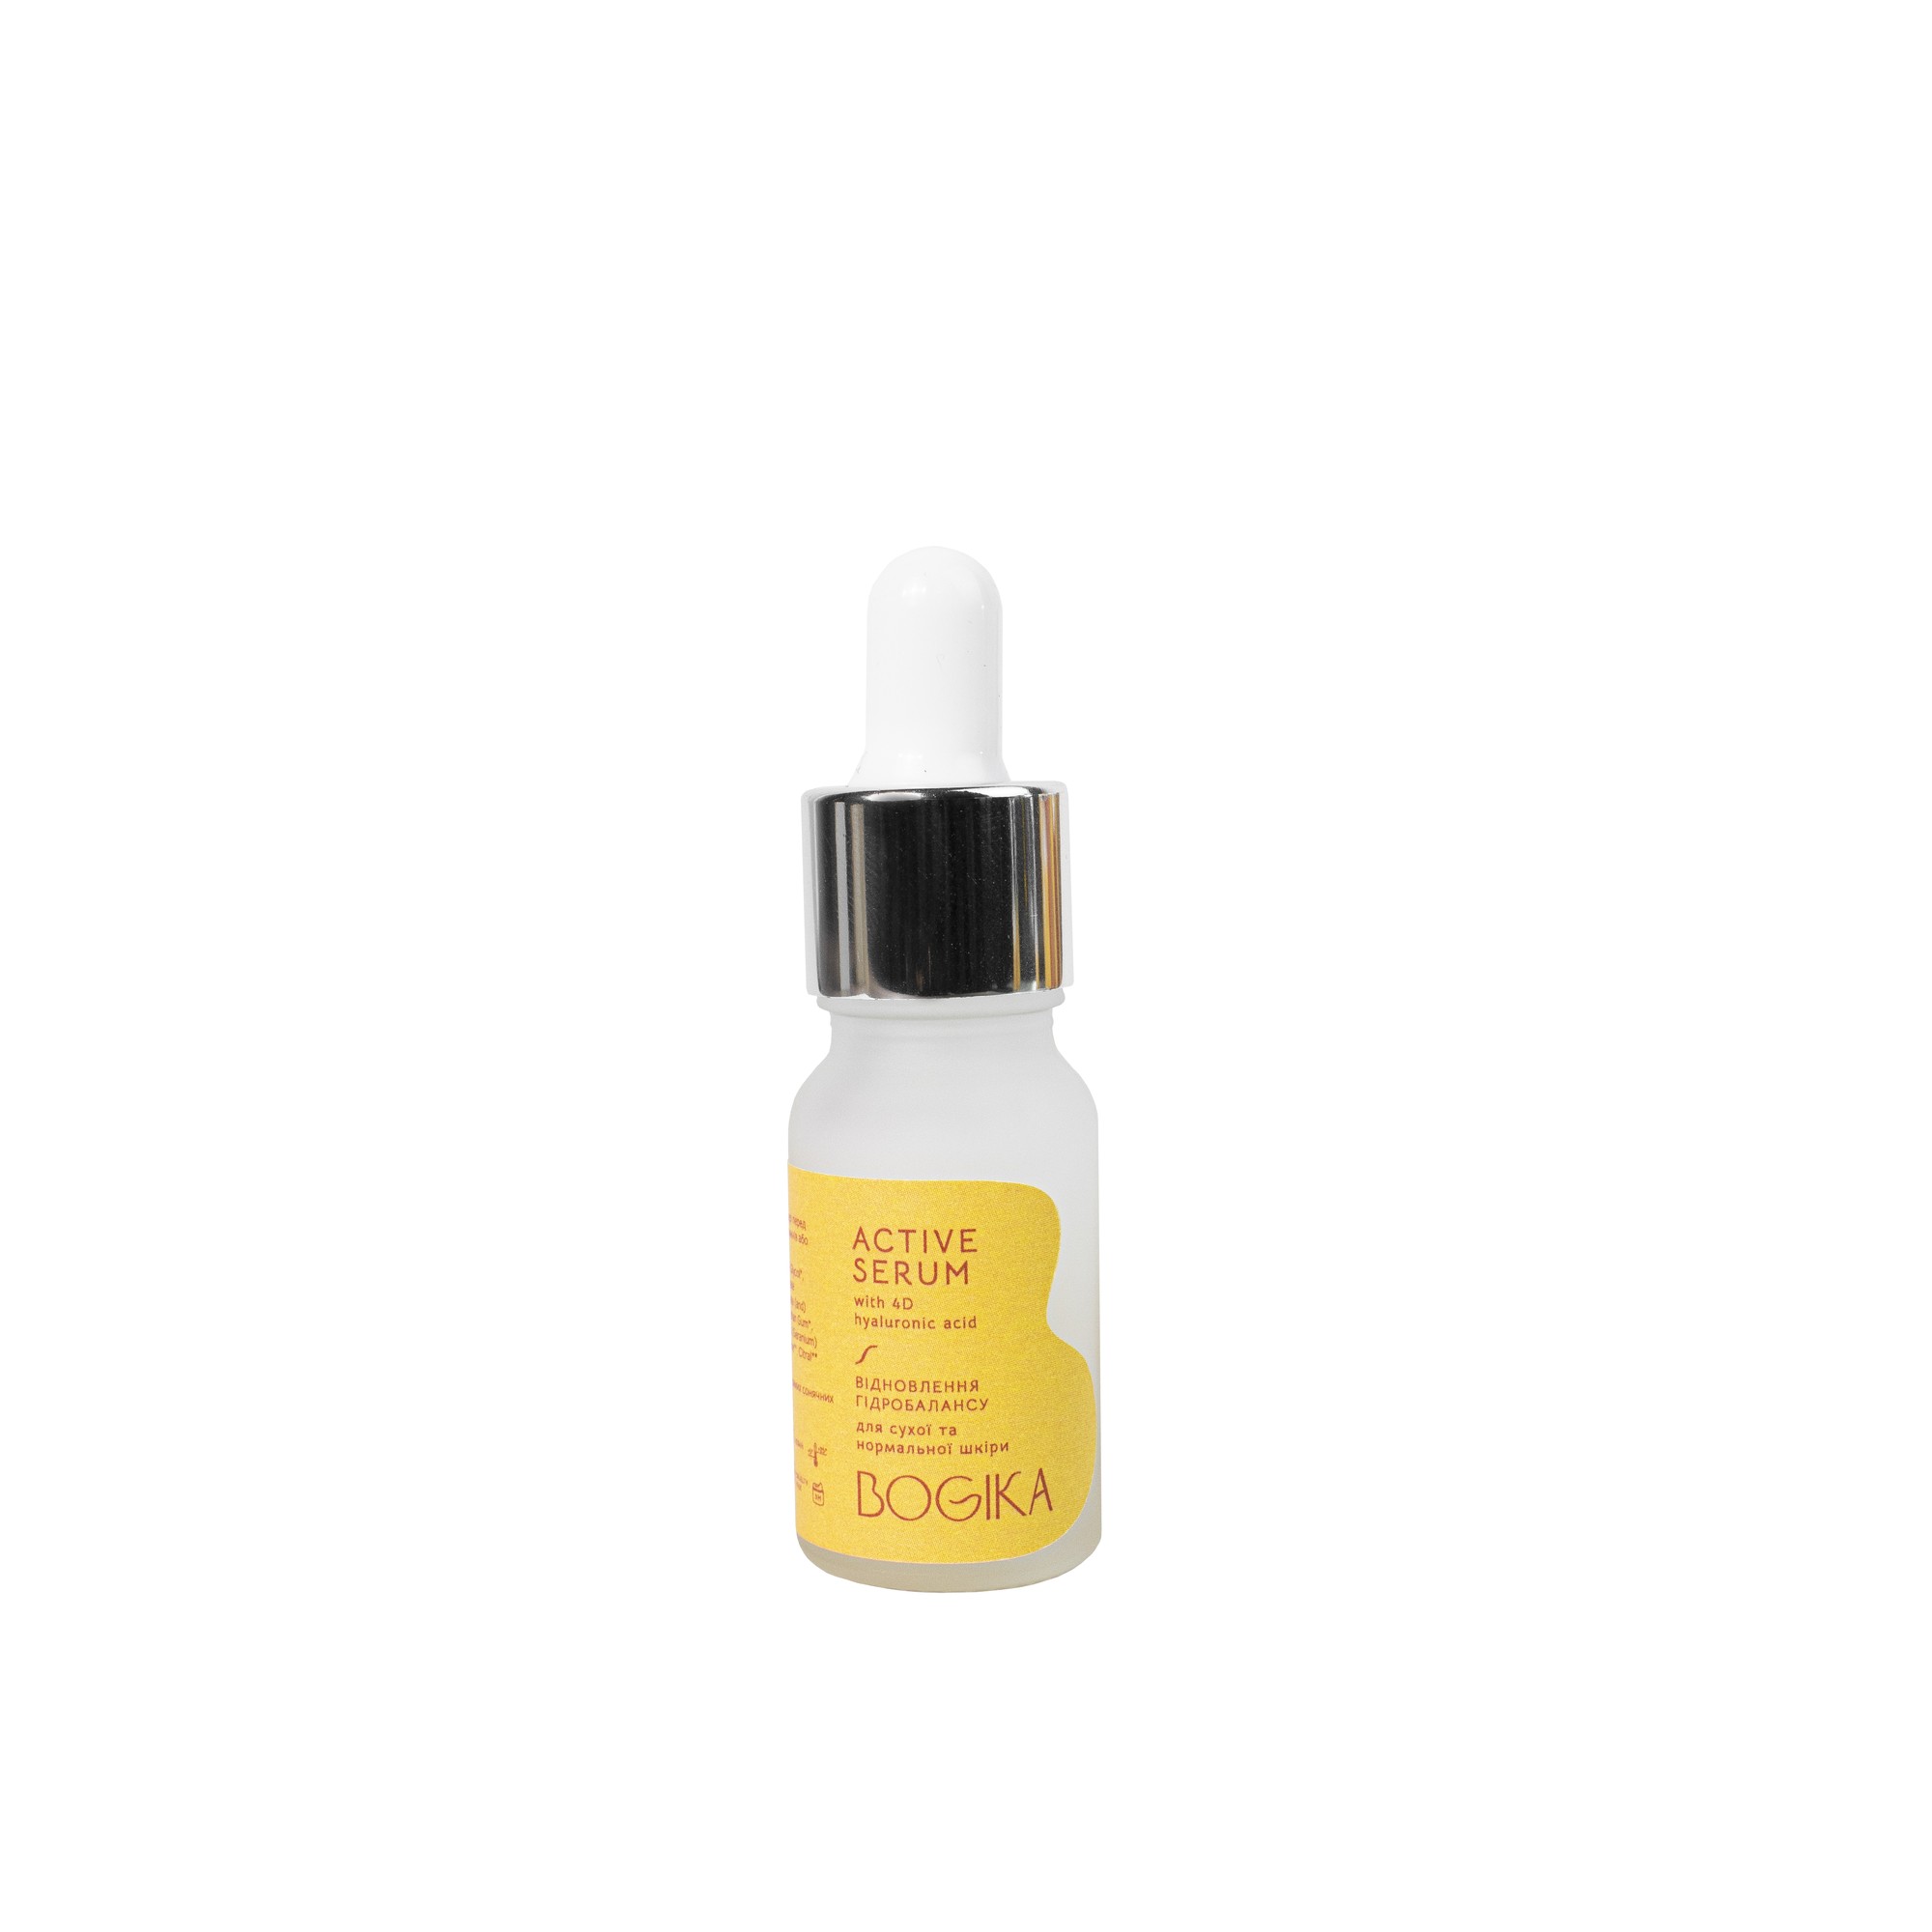 ACTIVE SERUM 10 ml for dry and normal skin with 4d-hyaluronic acid